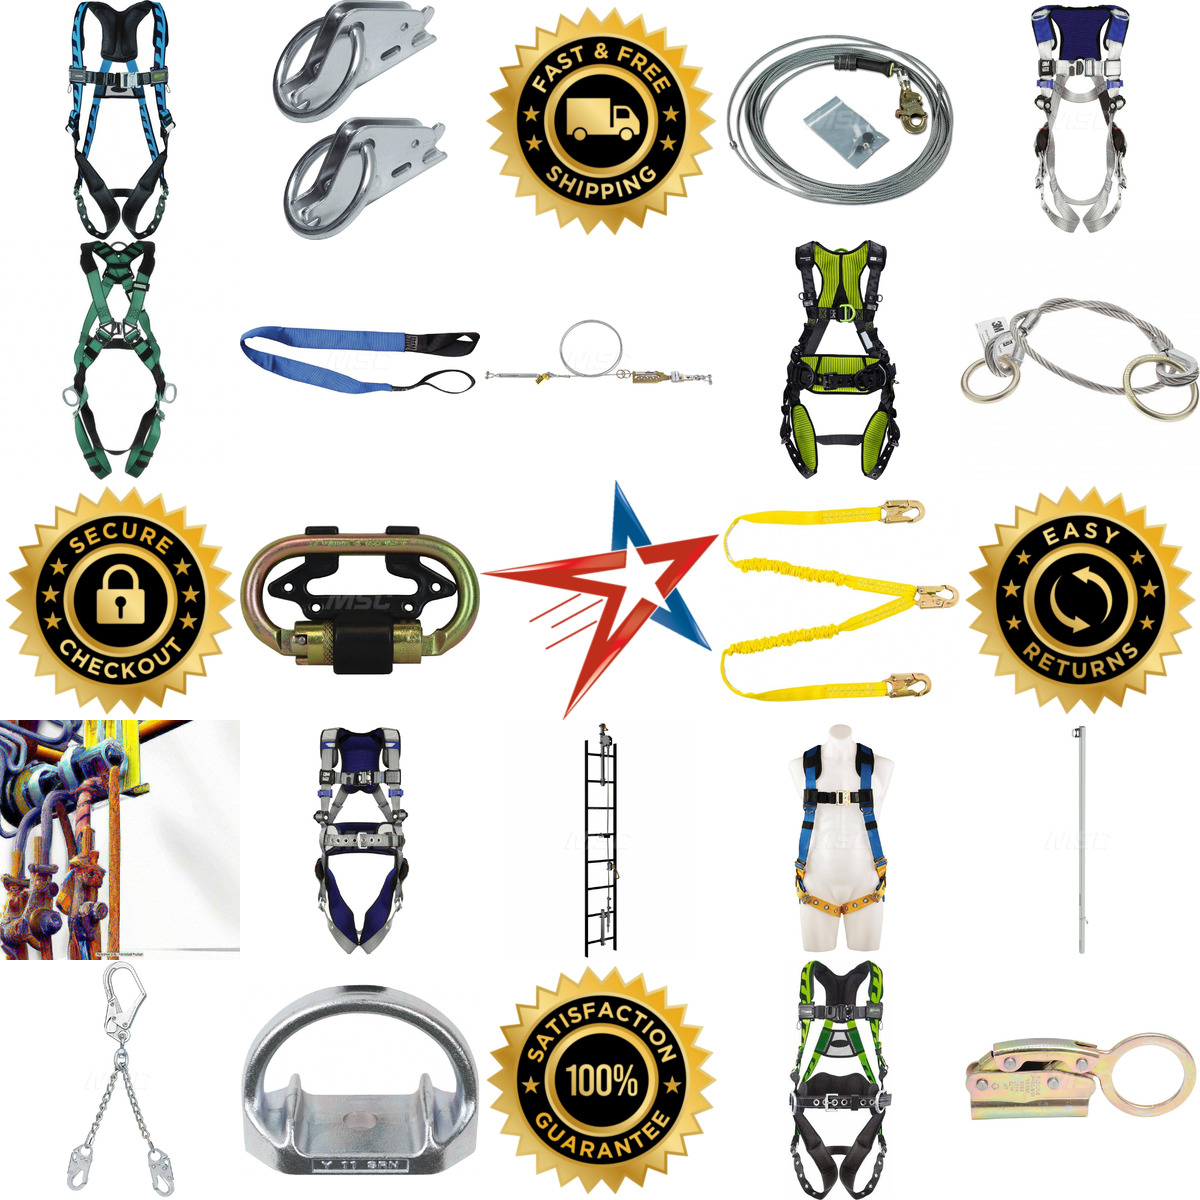 A selection of Fall Protection products on GoVets